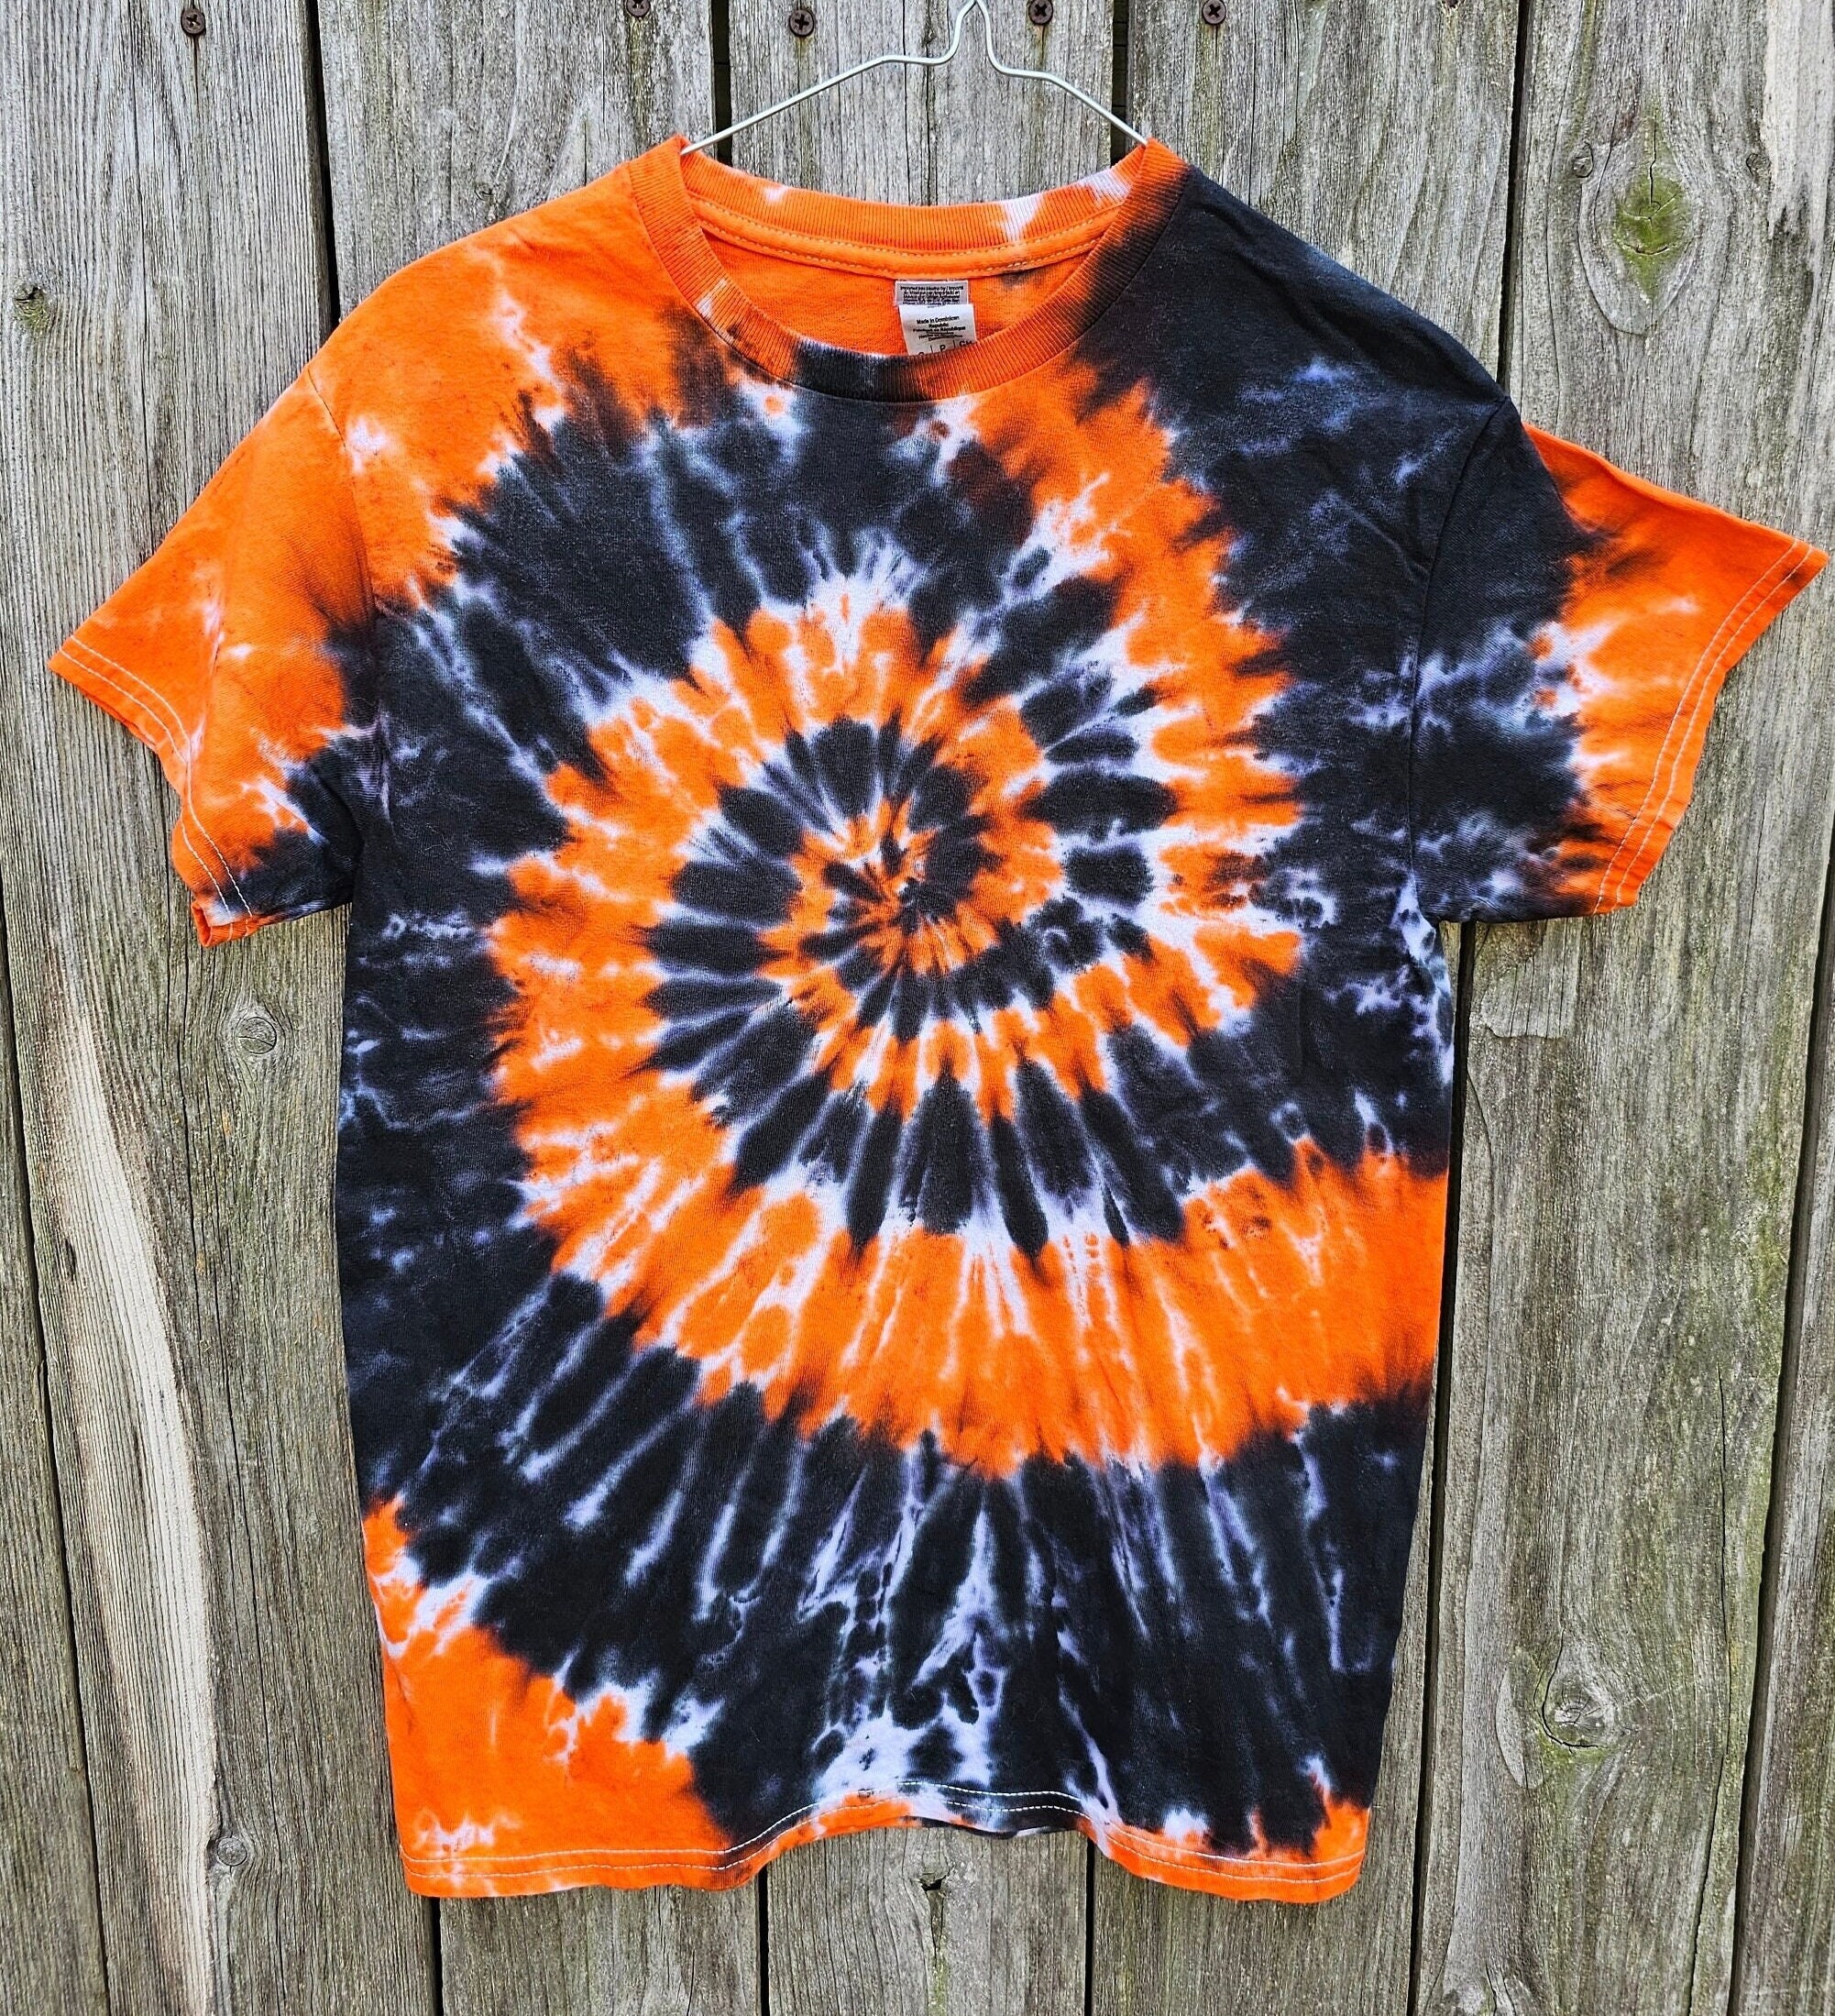 Tie Dye Designs: Halloween Spooky Spiral #13 [Red, Black, Gray and